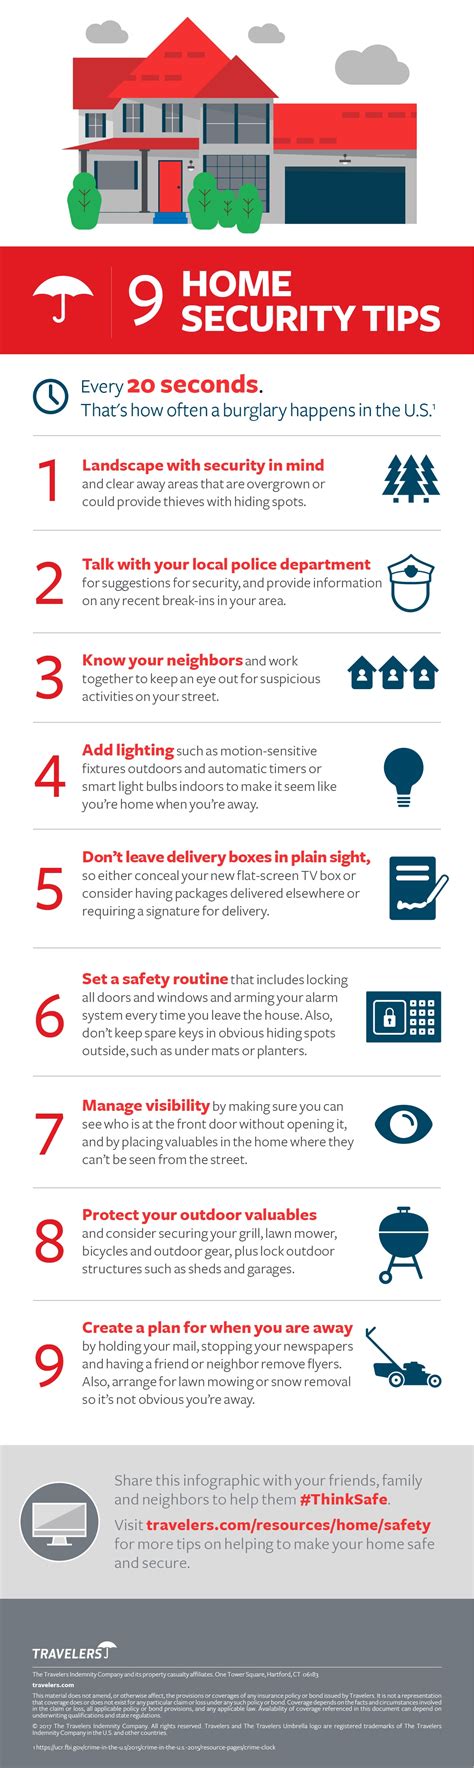 home safety and security tips